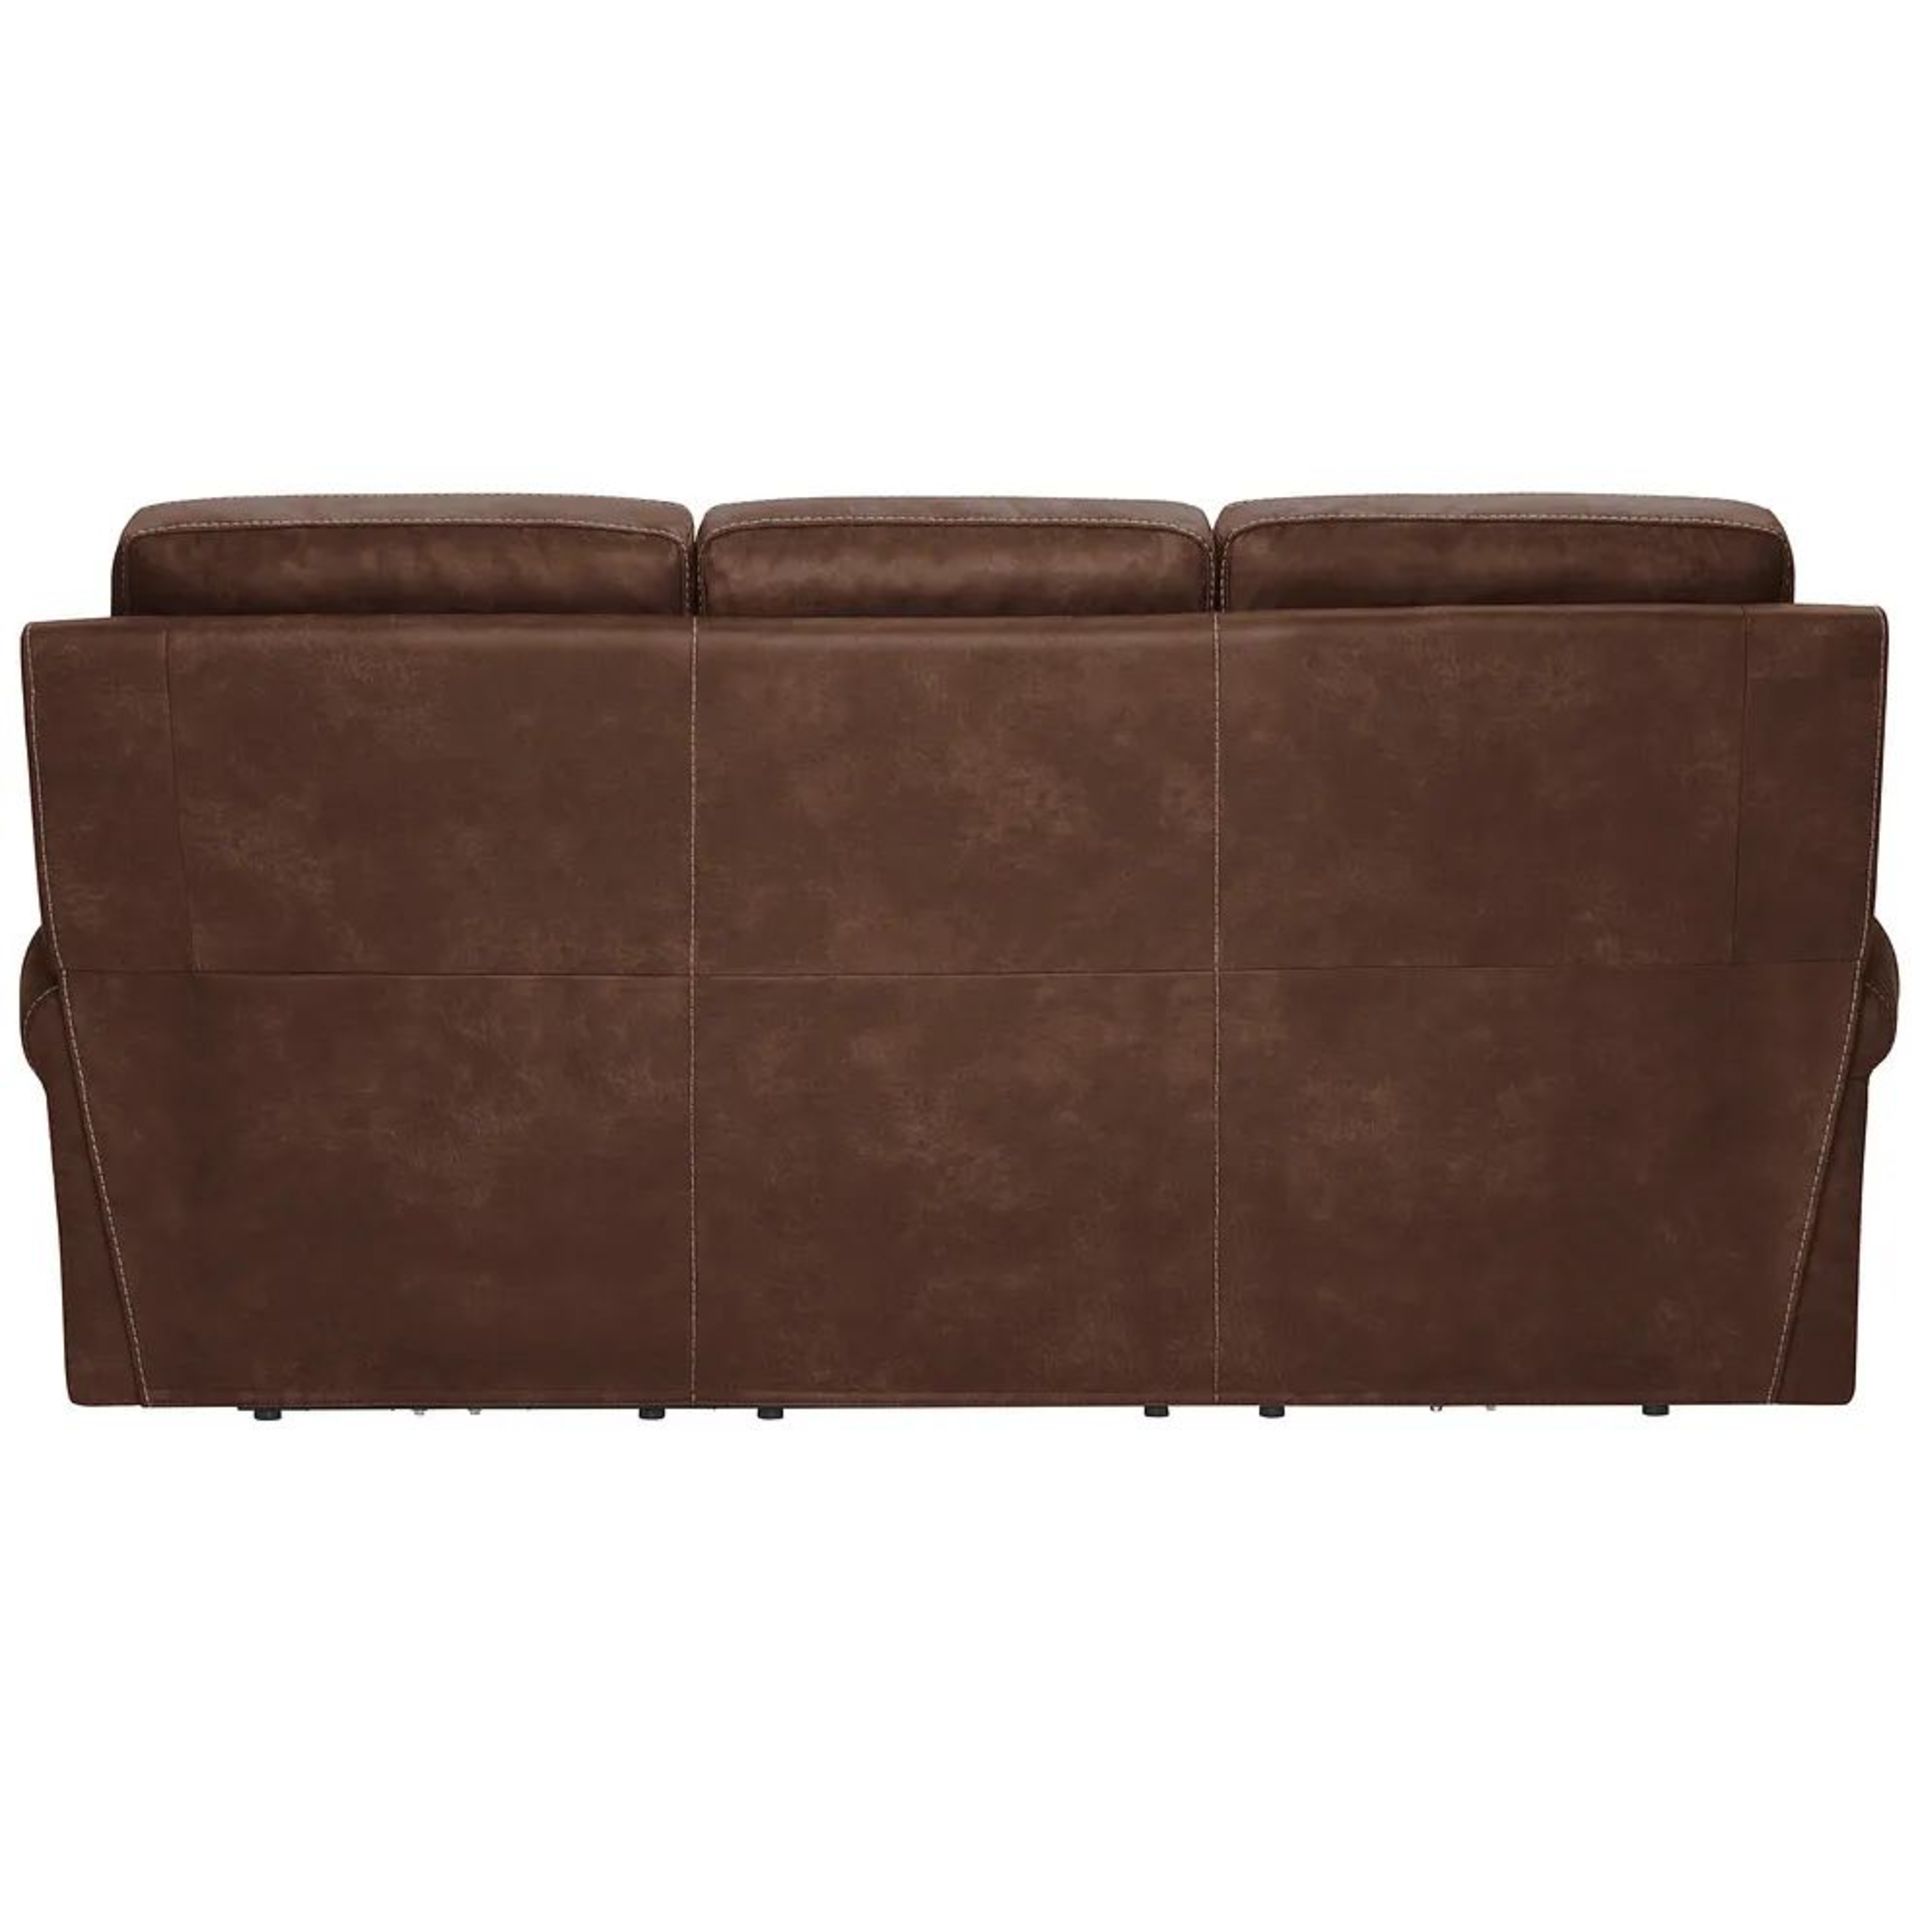 BRAND NEW COLORADO 3 Seater Sofa - DARK BROWN FABRIC. RRP £1099. Shown here in Ranch dark brown, our - Image 2 of 5